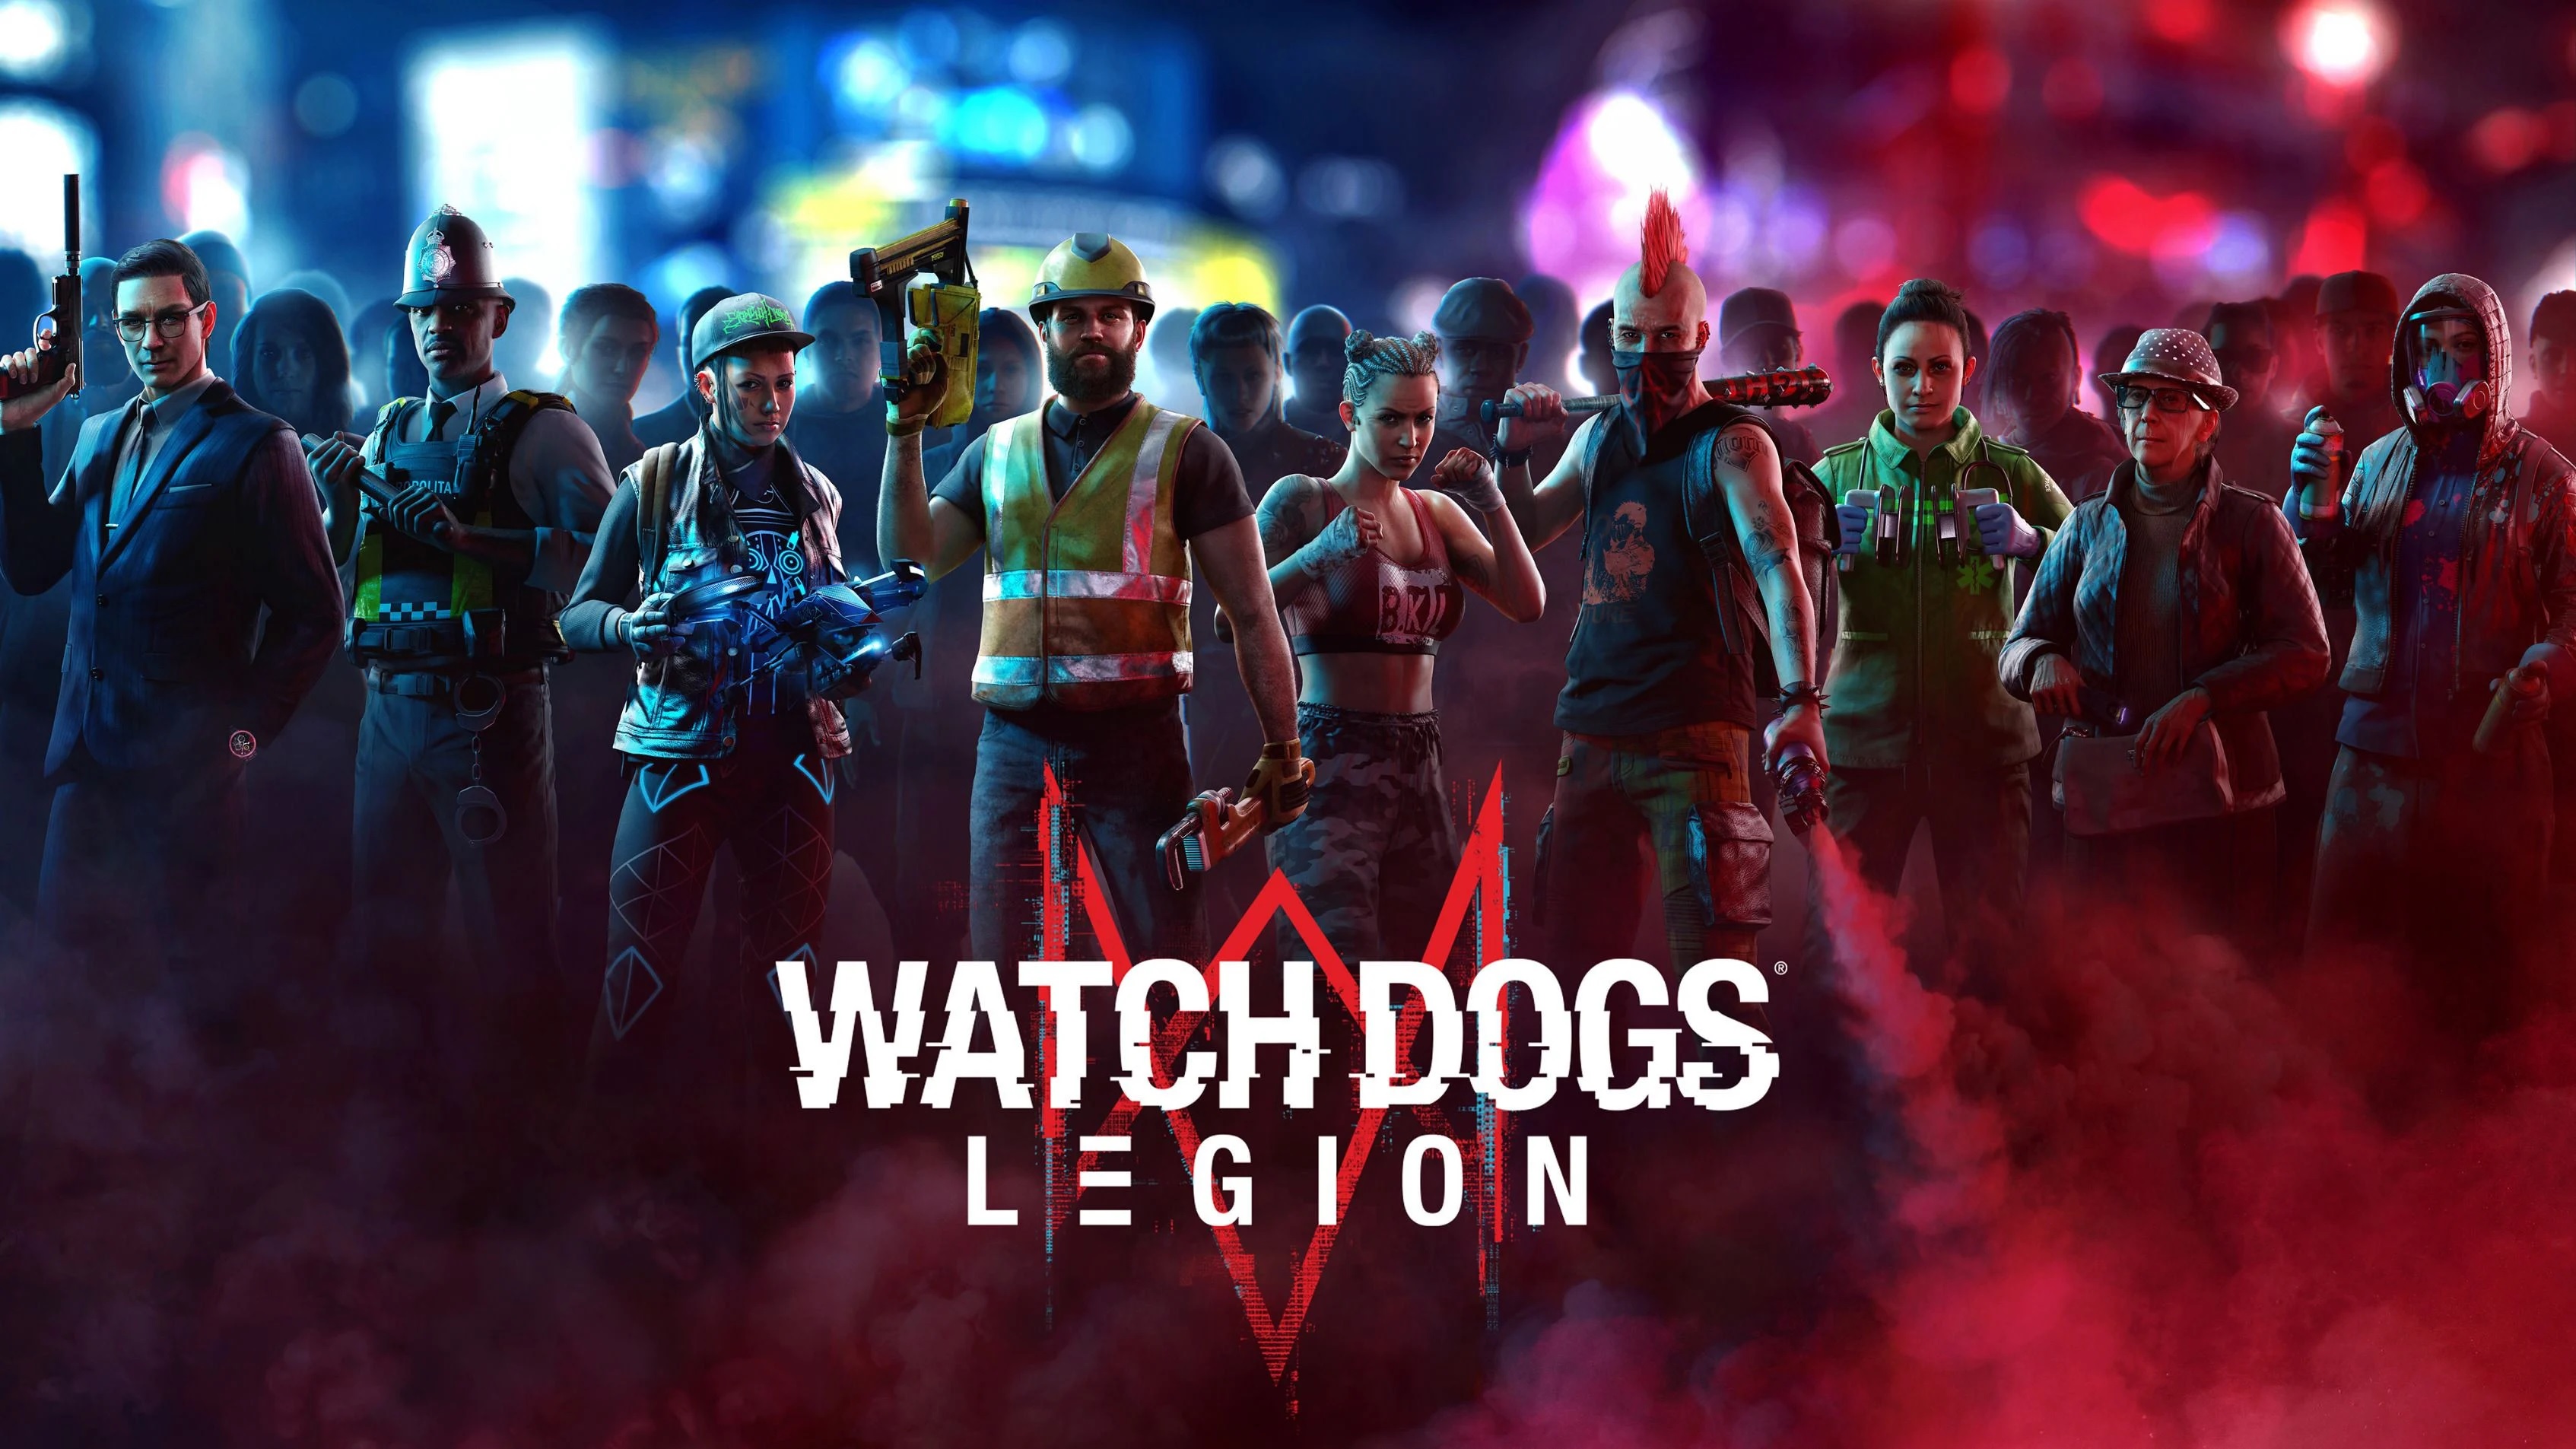 We now know the graphic requirements for Watch Dogs Legion